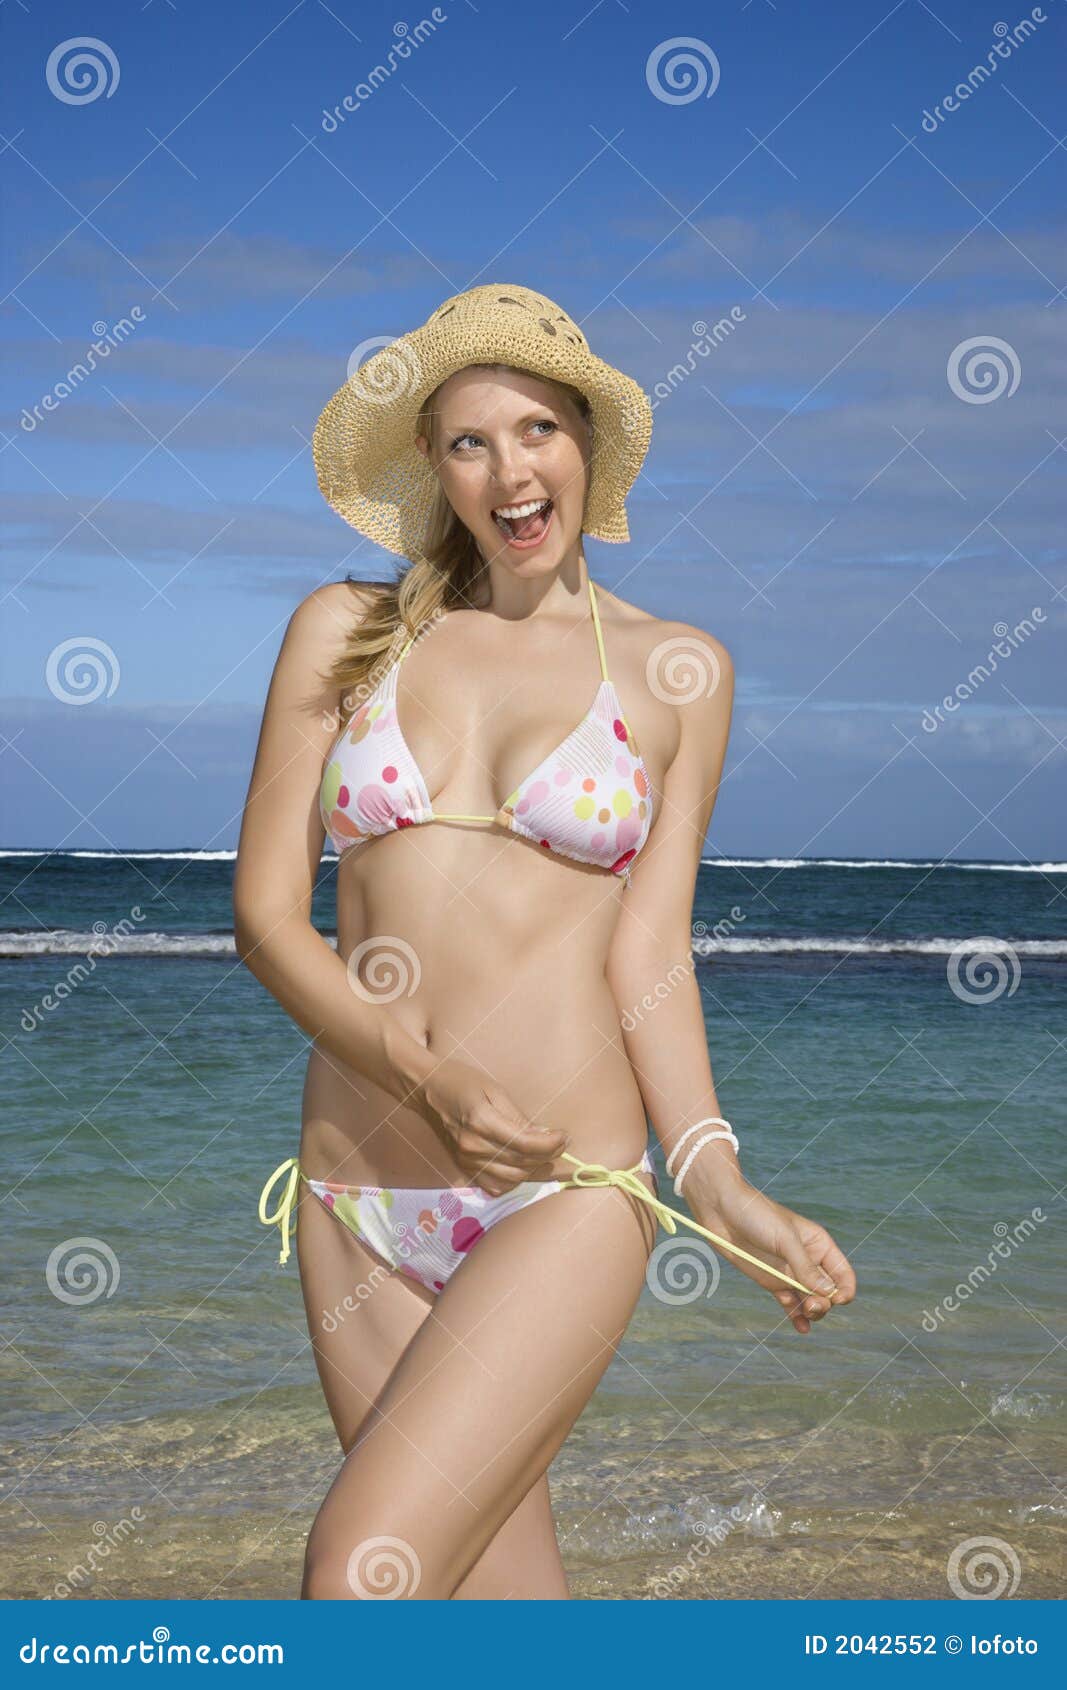 Sexy G String Bikini Girl Stock Photo, Picture and Royalty Free Image.  Image 23120505.